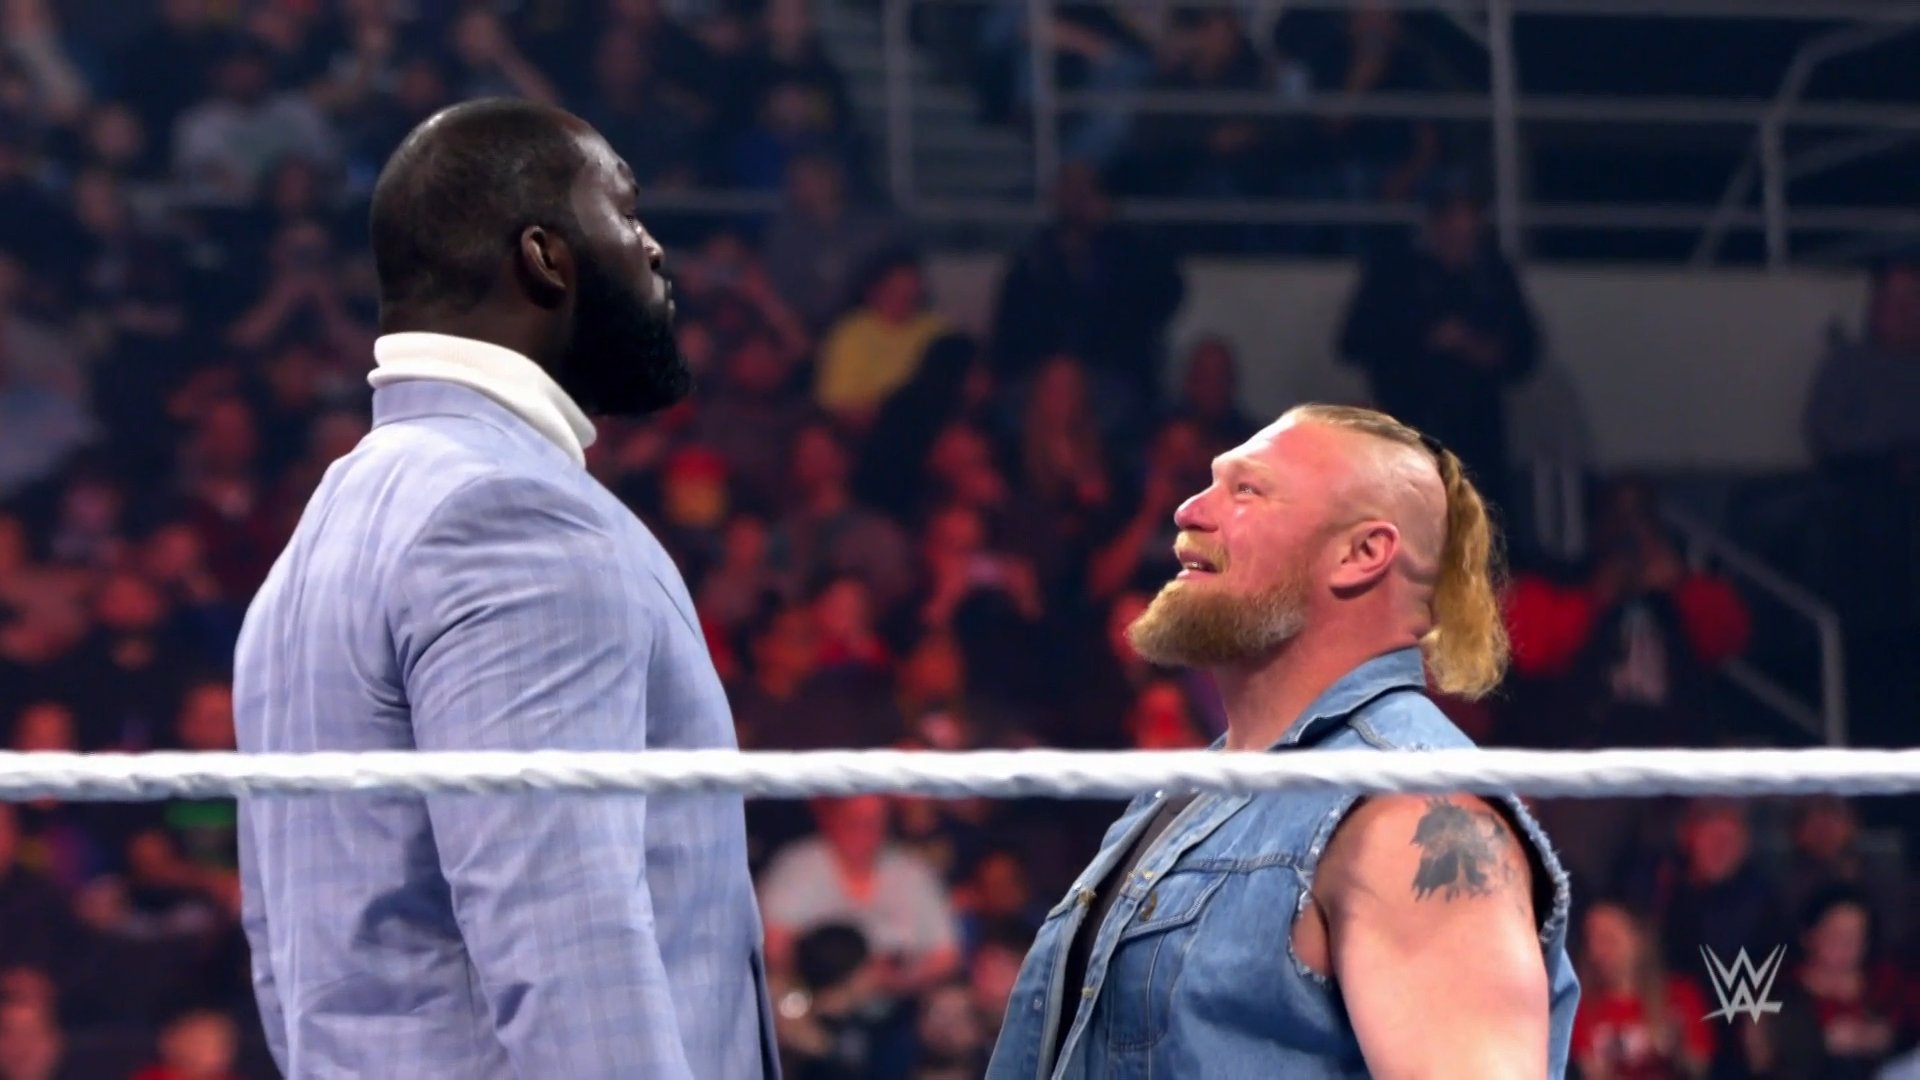 WWE News: Road Dogg makes a Bold prediction about Brock Lesnar vs Omos WrestleMania 39 match. Check out what the WWE Legend has to say